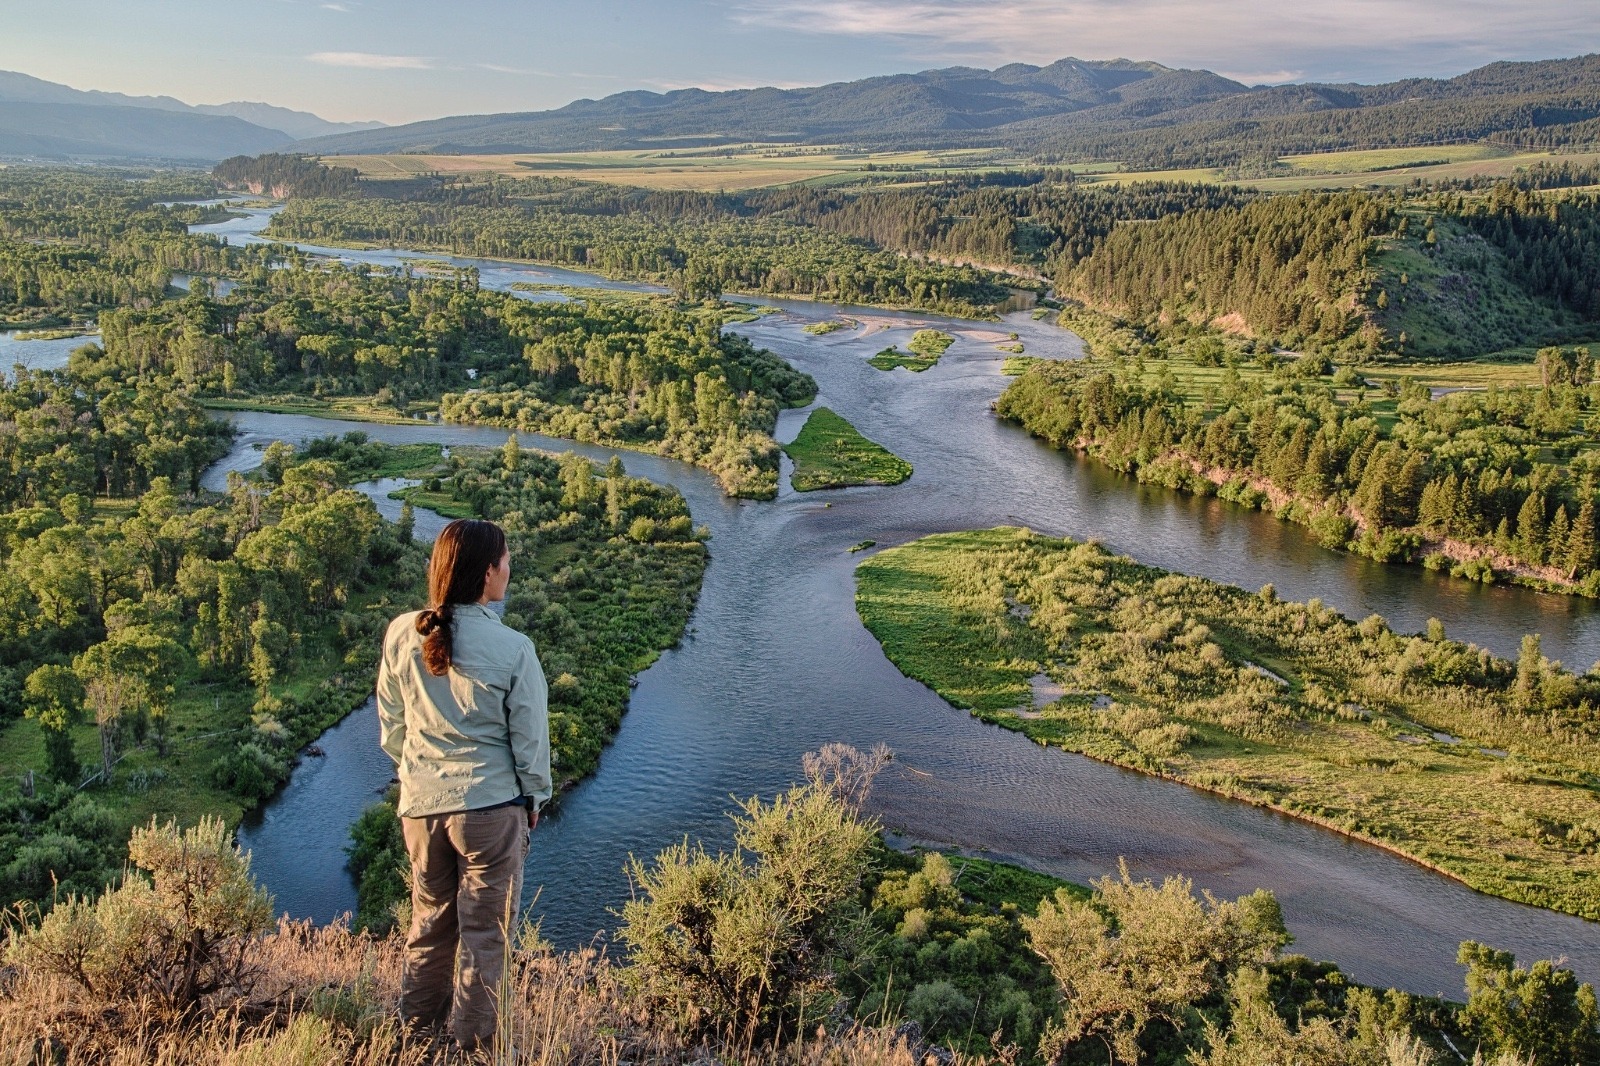 A public land user stands at an overlook above the South Fork of the Snake River, a popular destination for global anglers. It's a sighing vision mirrored on the Yellowstone, Upper Missouri and other rivers that define the character of Greater Yellowstone, their persistence threatened by losing snow and no political will to address the cause. Photo courtesy Bureau of Land Management